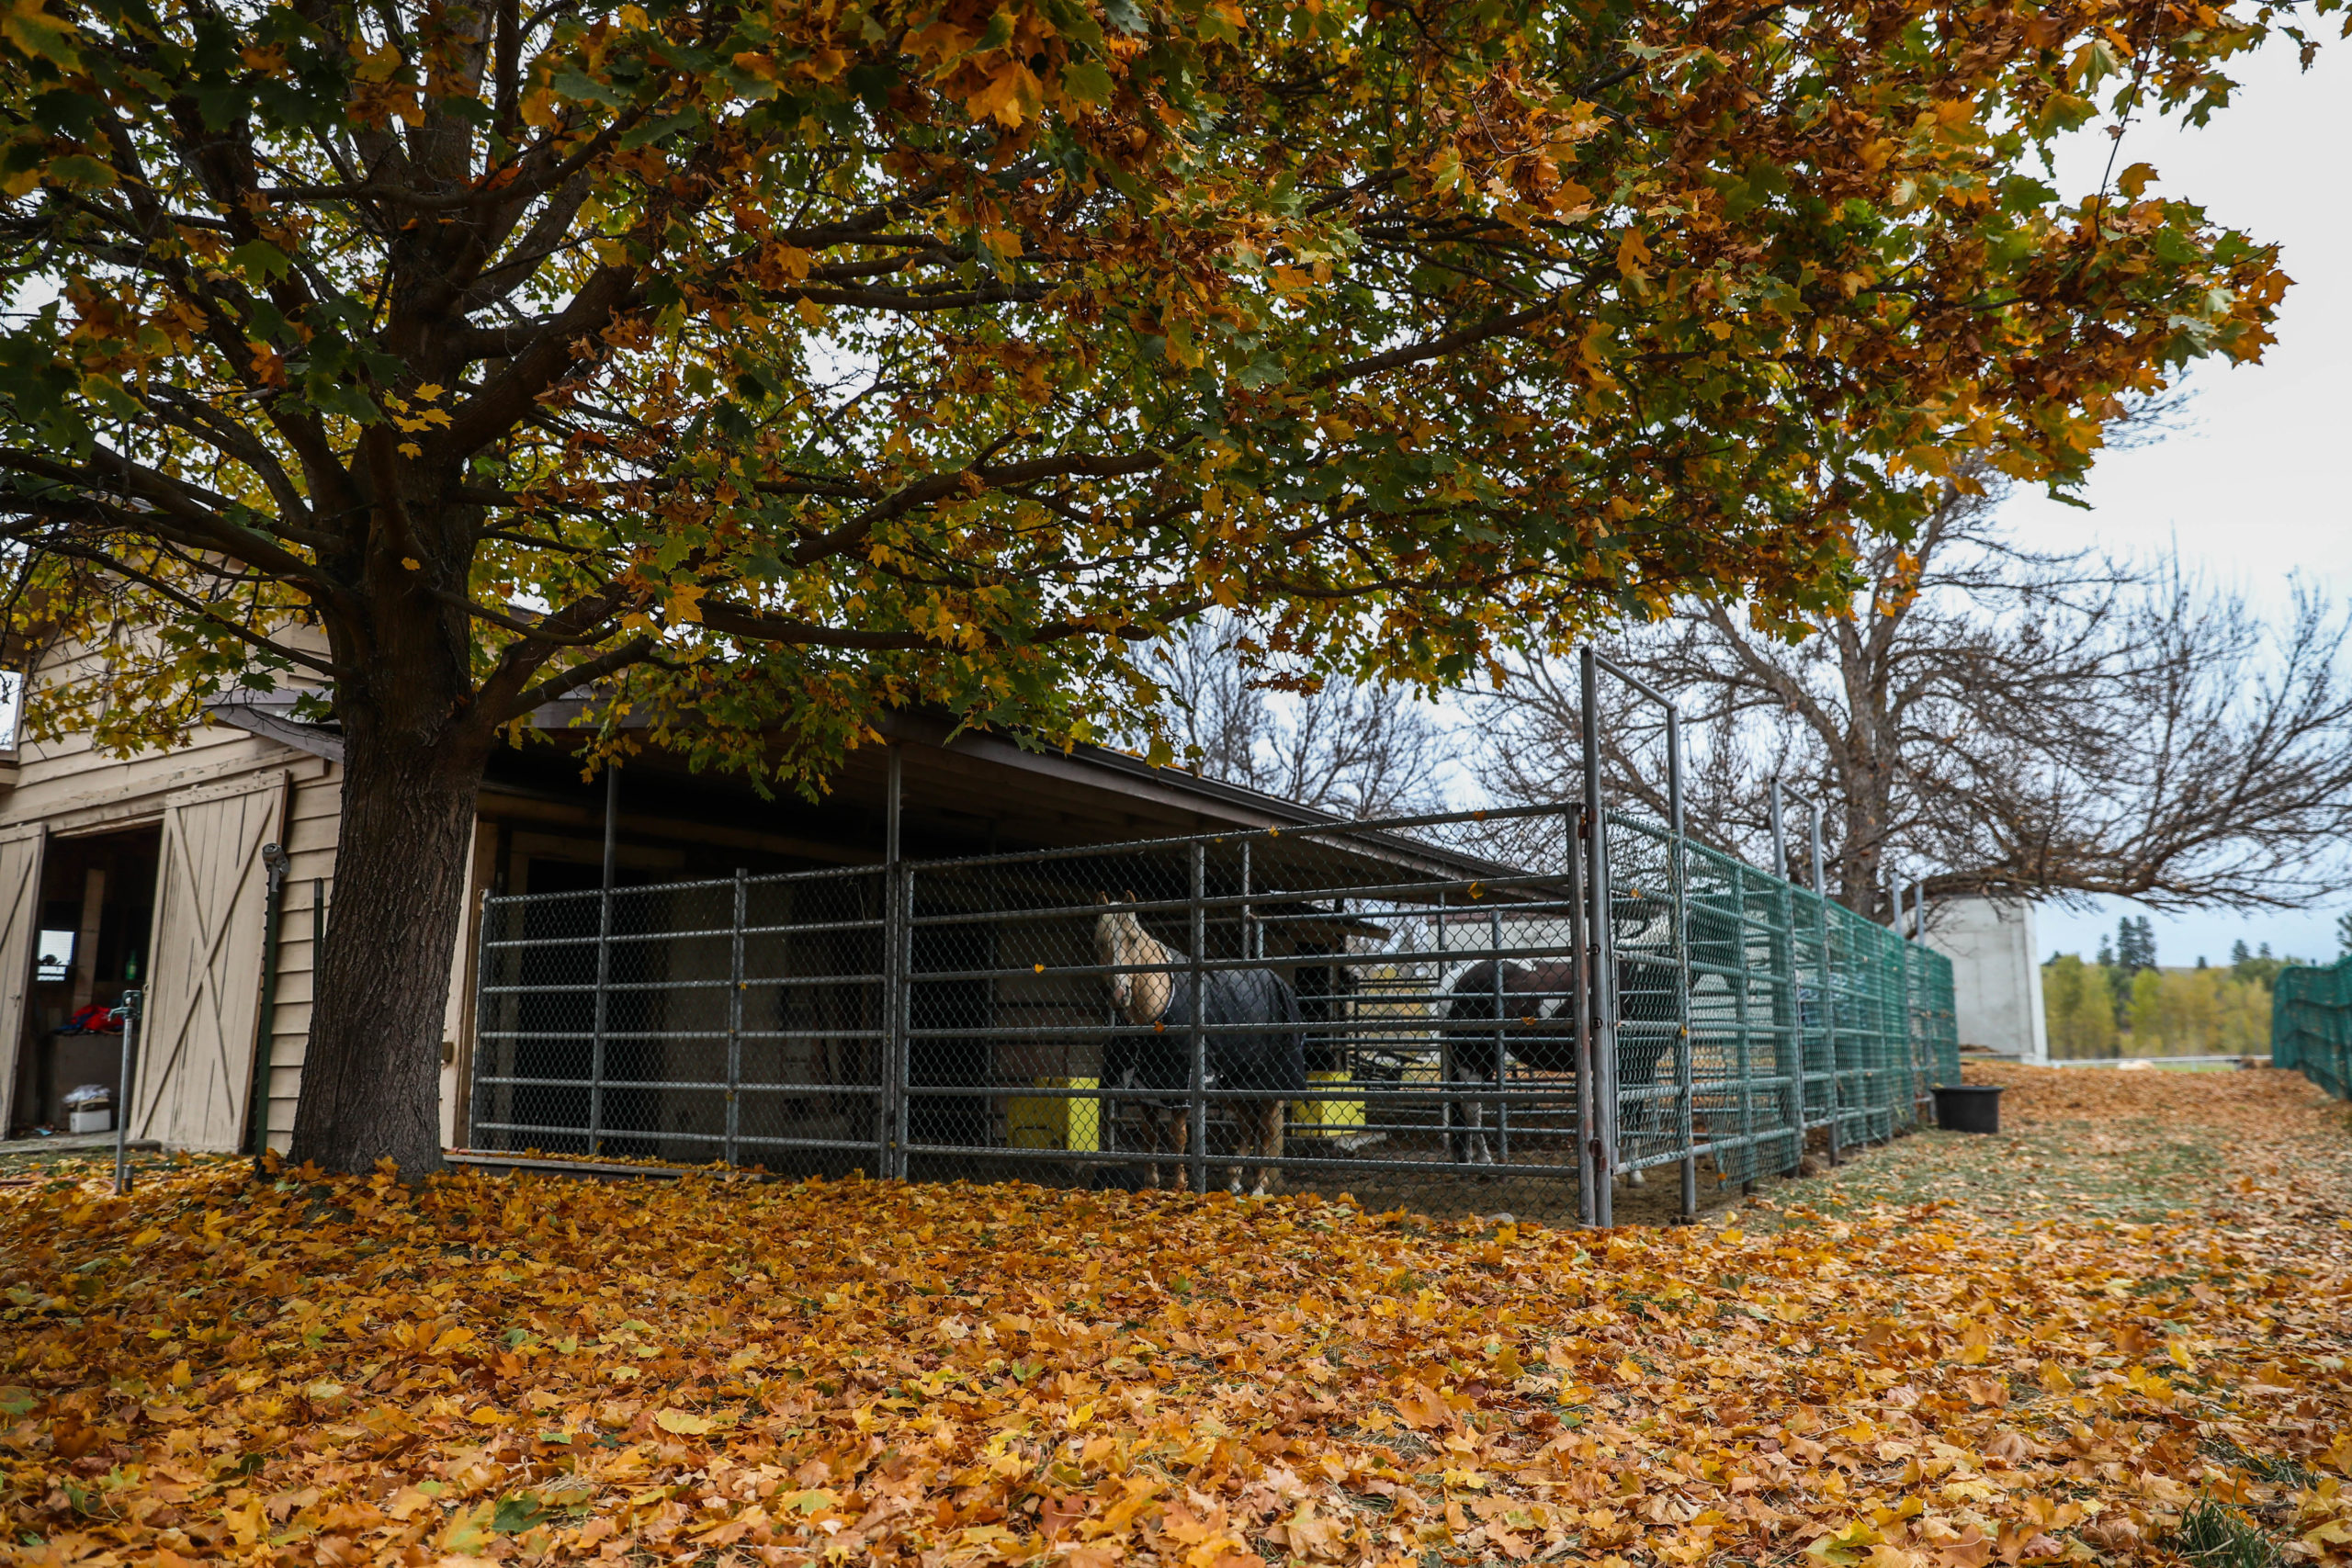 Fall has arrived at the riding stable, leaving the ground at Trotting Horse bright and colorful.